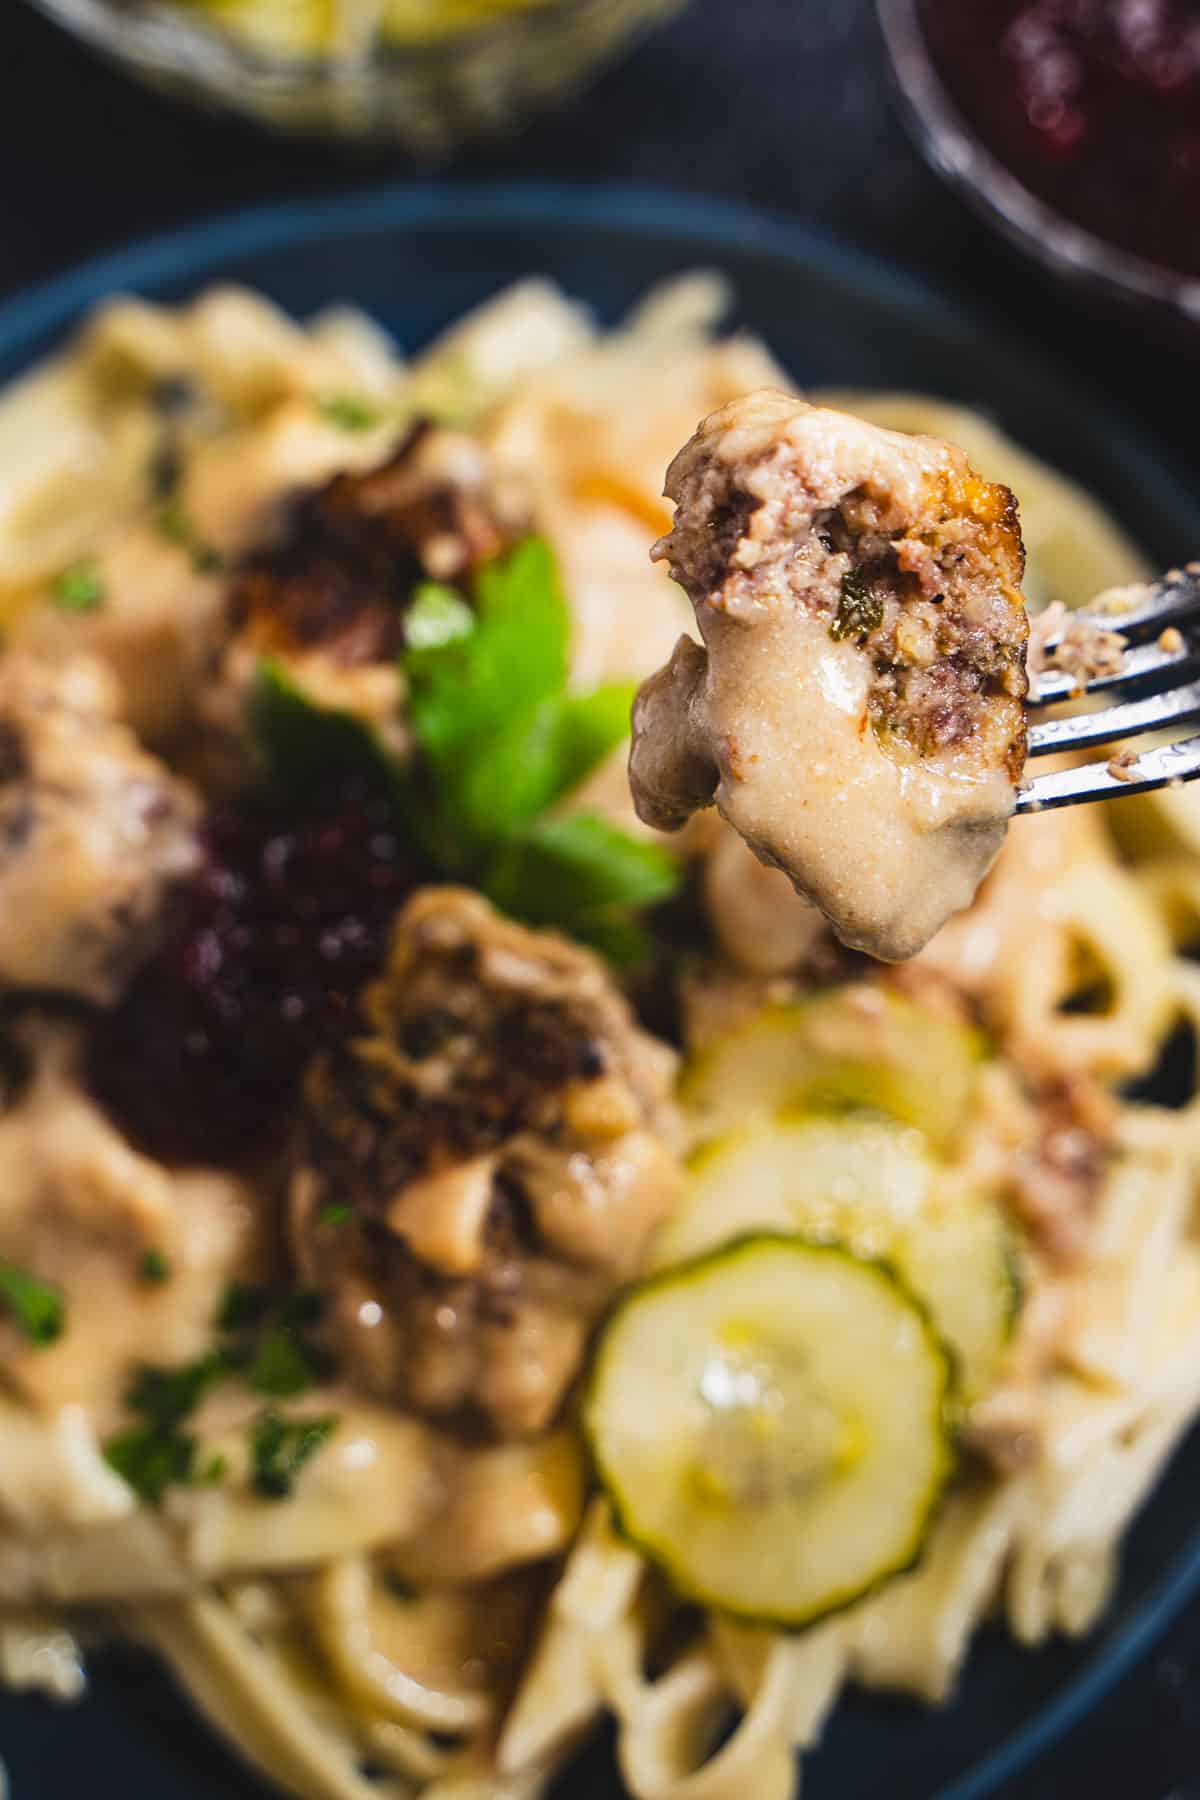 swedish meatball on a fork over a plate of swedish meatballs and a sauce made with sourcream over a bed of buttered noodles on a blue plate garnished with lingonberry jam and pickled cucumbers.